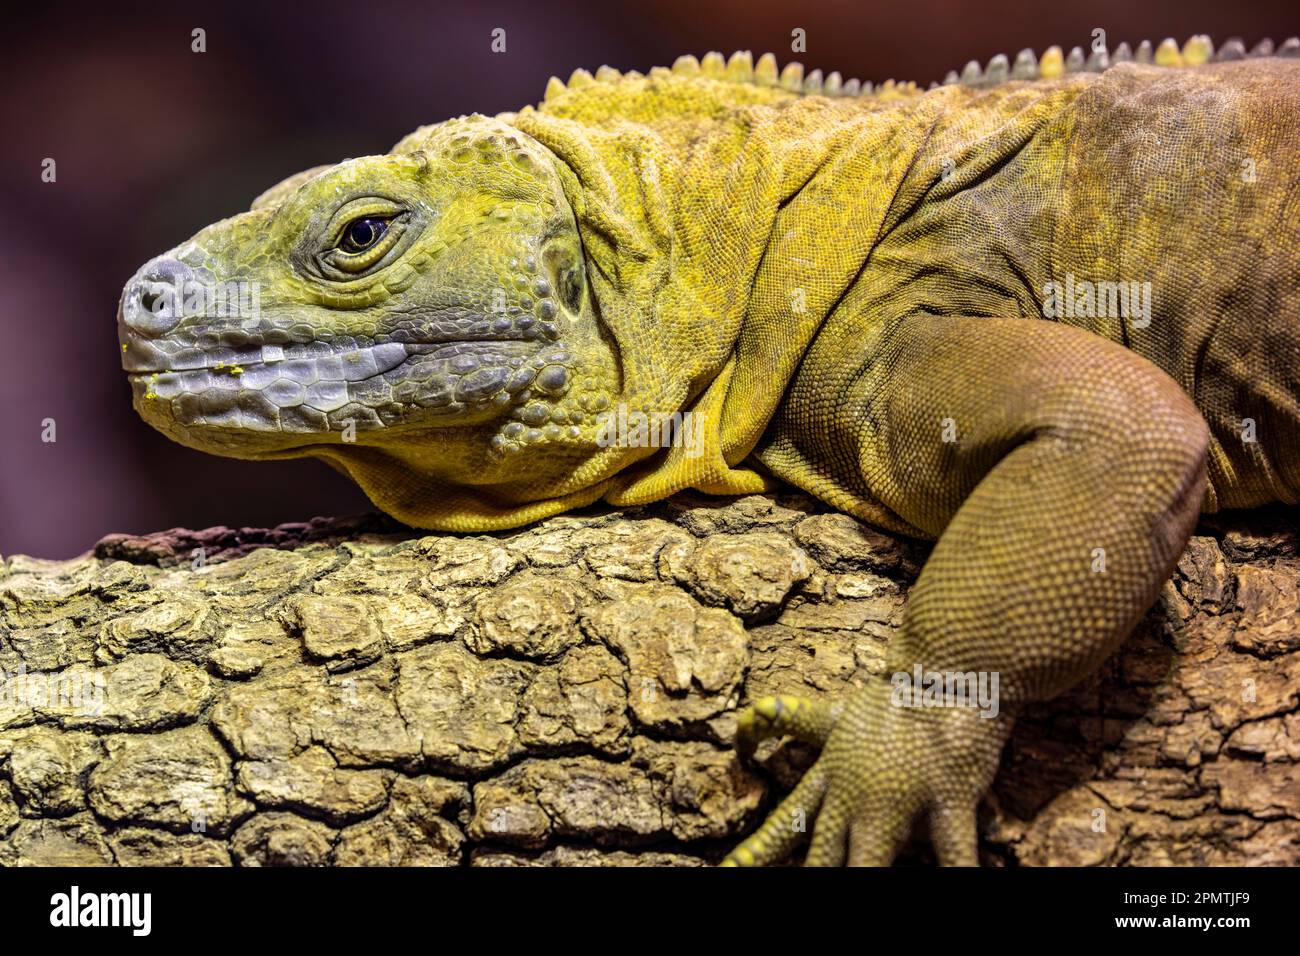 The Jamaican iguana (Cyclura collei)  is a large species of lizard in the family Iguanidae. The species is endemic to Jamaica. Critically endangered, Stock Photo